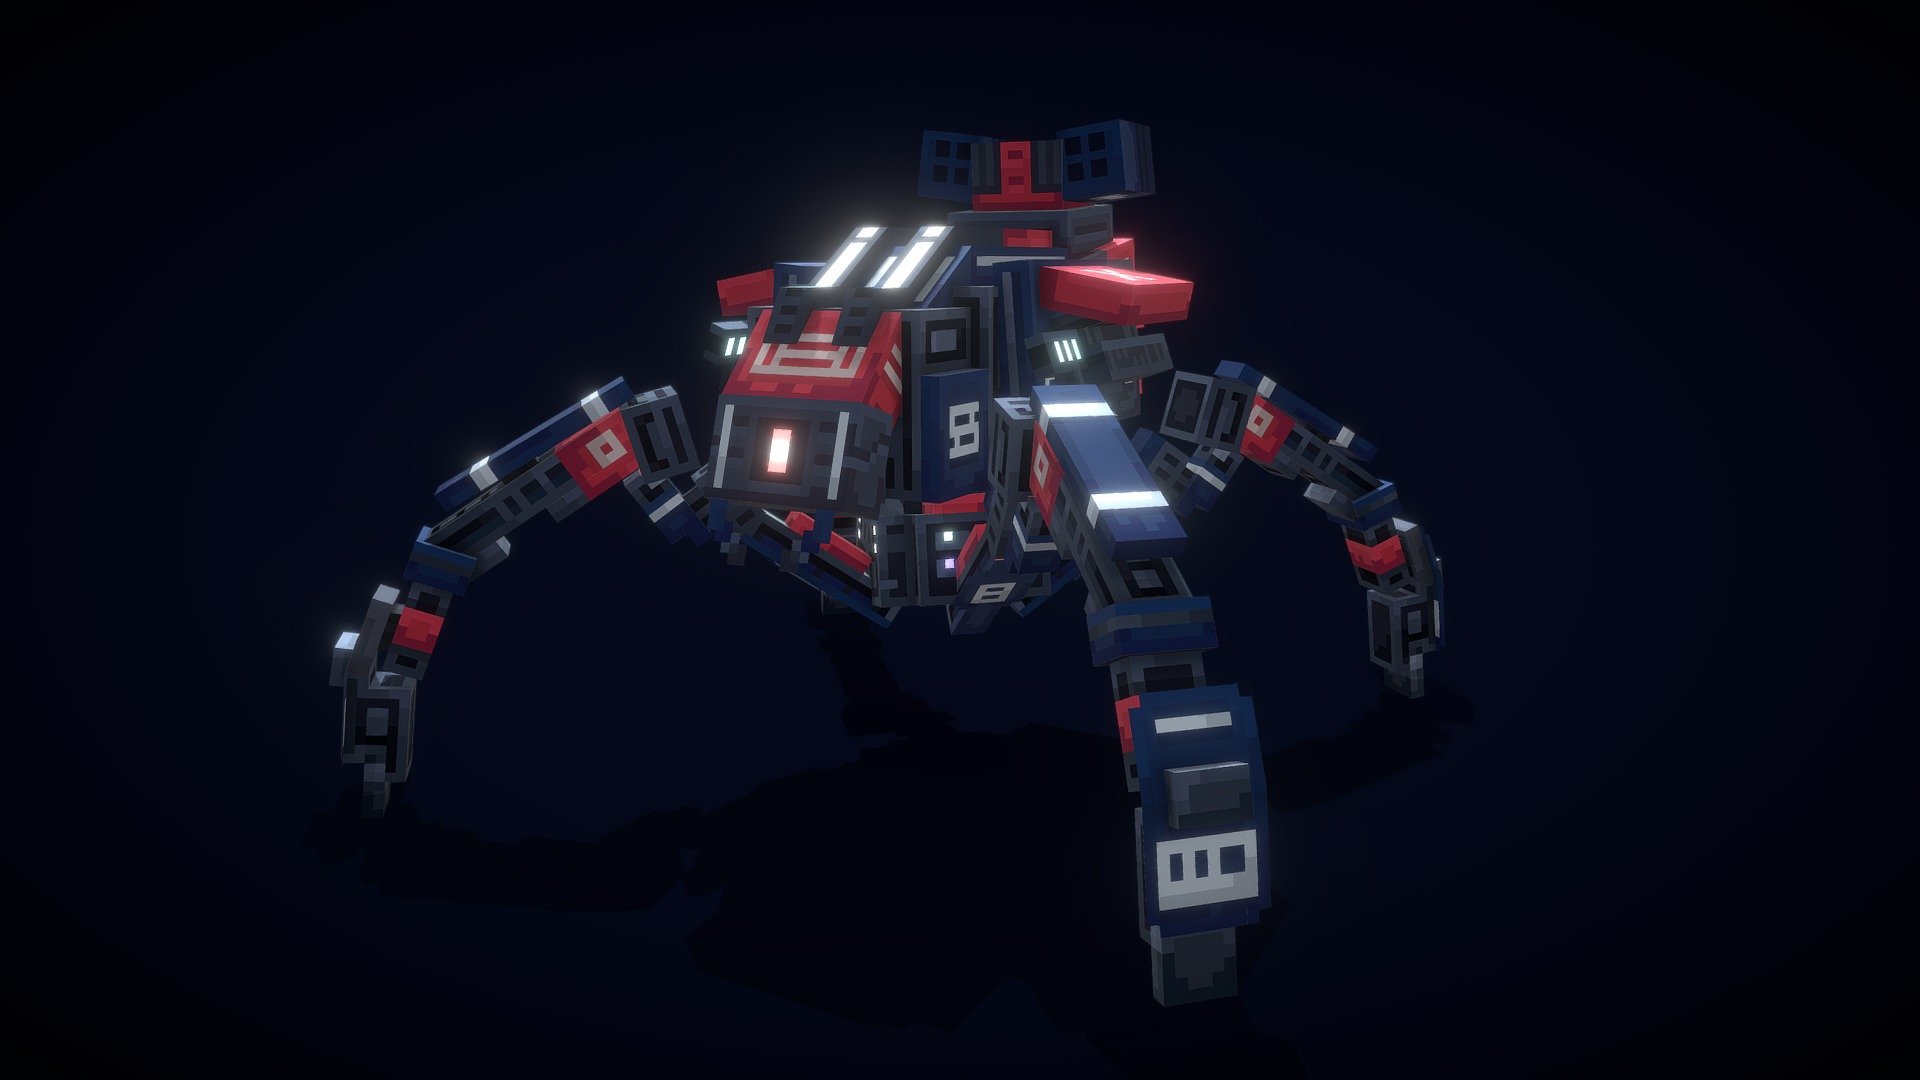 AI mech invader model, i try make a mechanic spider, and i think its out cool, 1-2 hours on modeling and 5 hours on painting, i finnaly made it 3d model